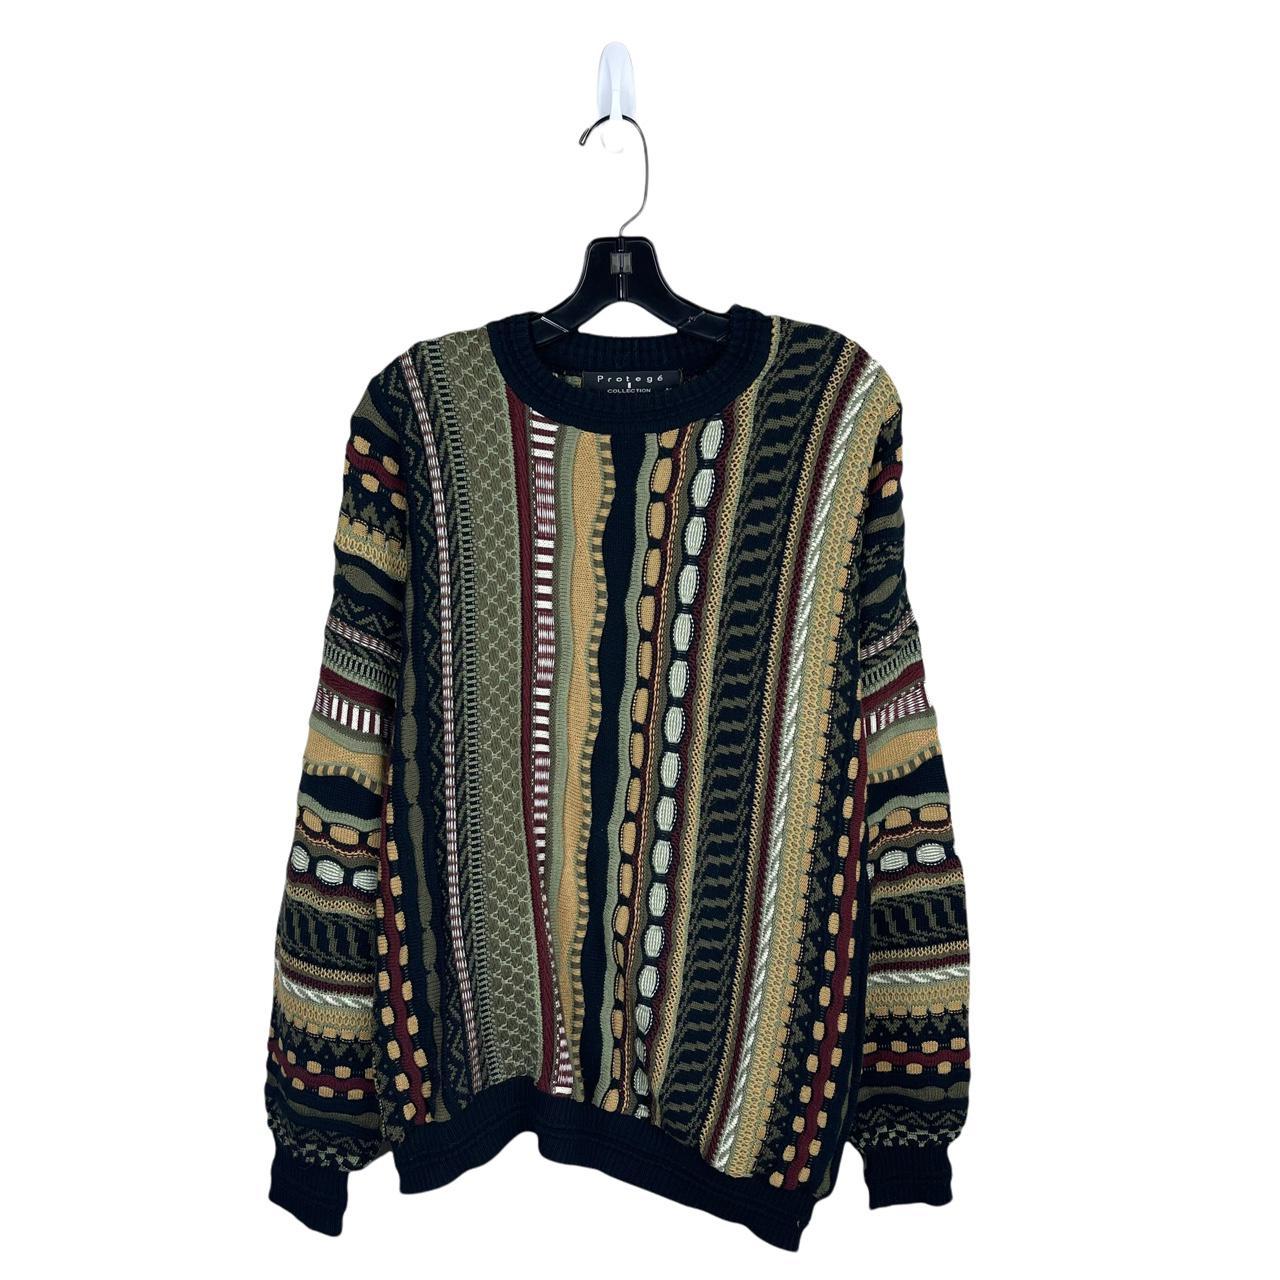 Product Image 1 - Vintage 90s Coogi Style Knit